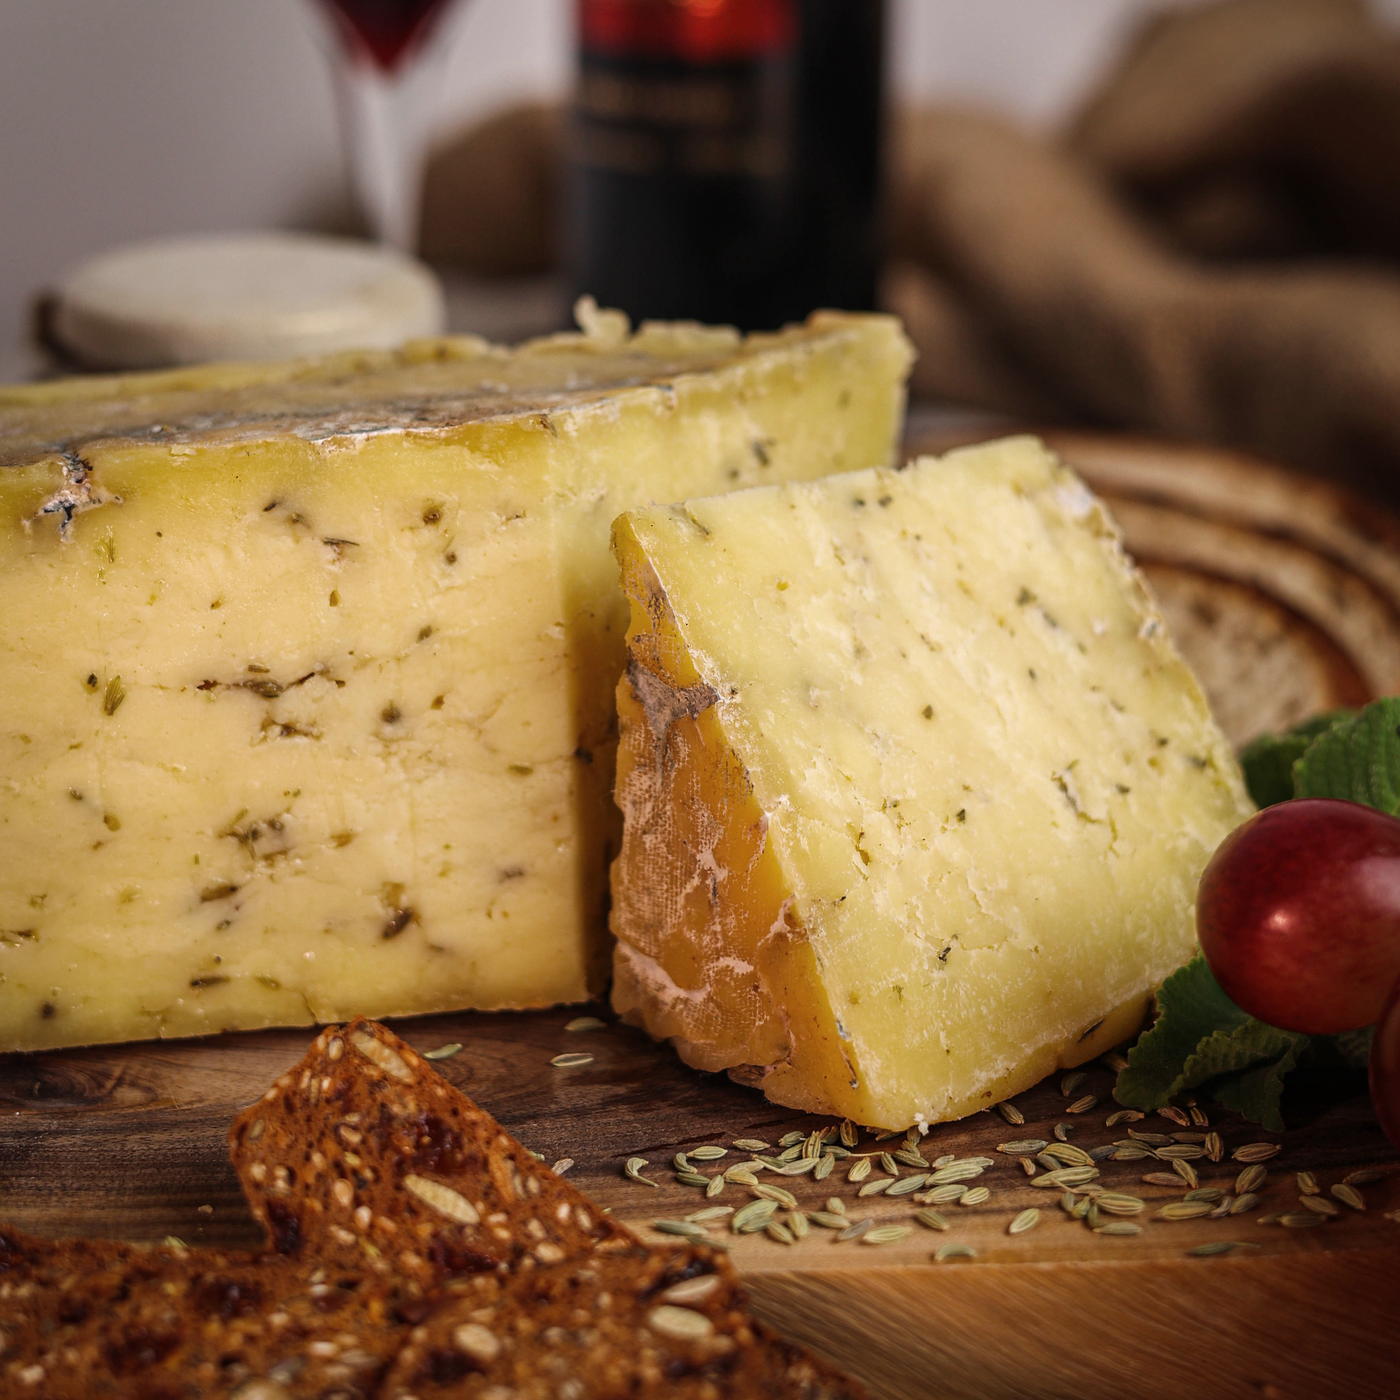 Käse Saunf Cheese is a semi-hard milled curd cheese infused with organic fennel seeds and aged for 6-8 months.